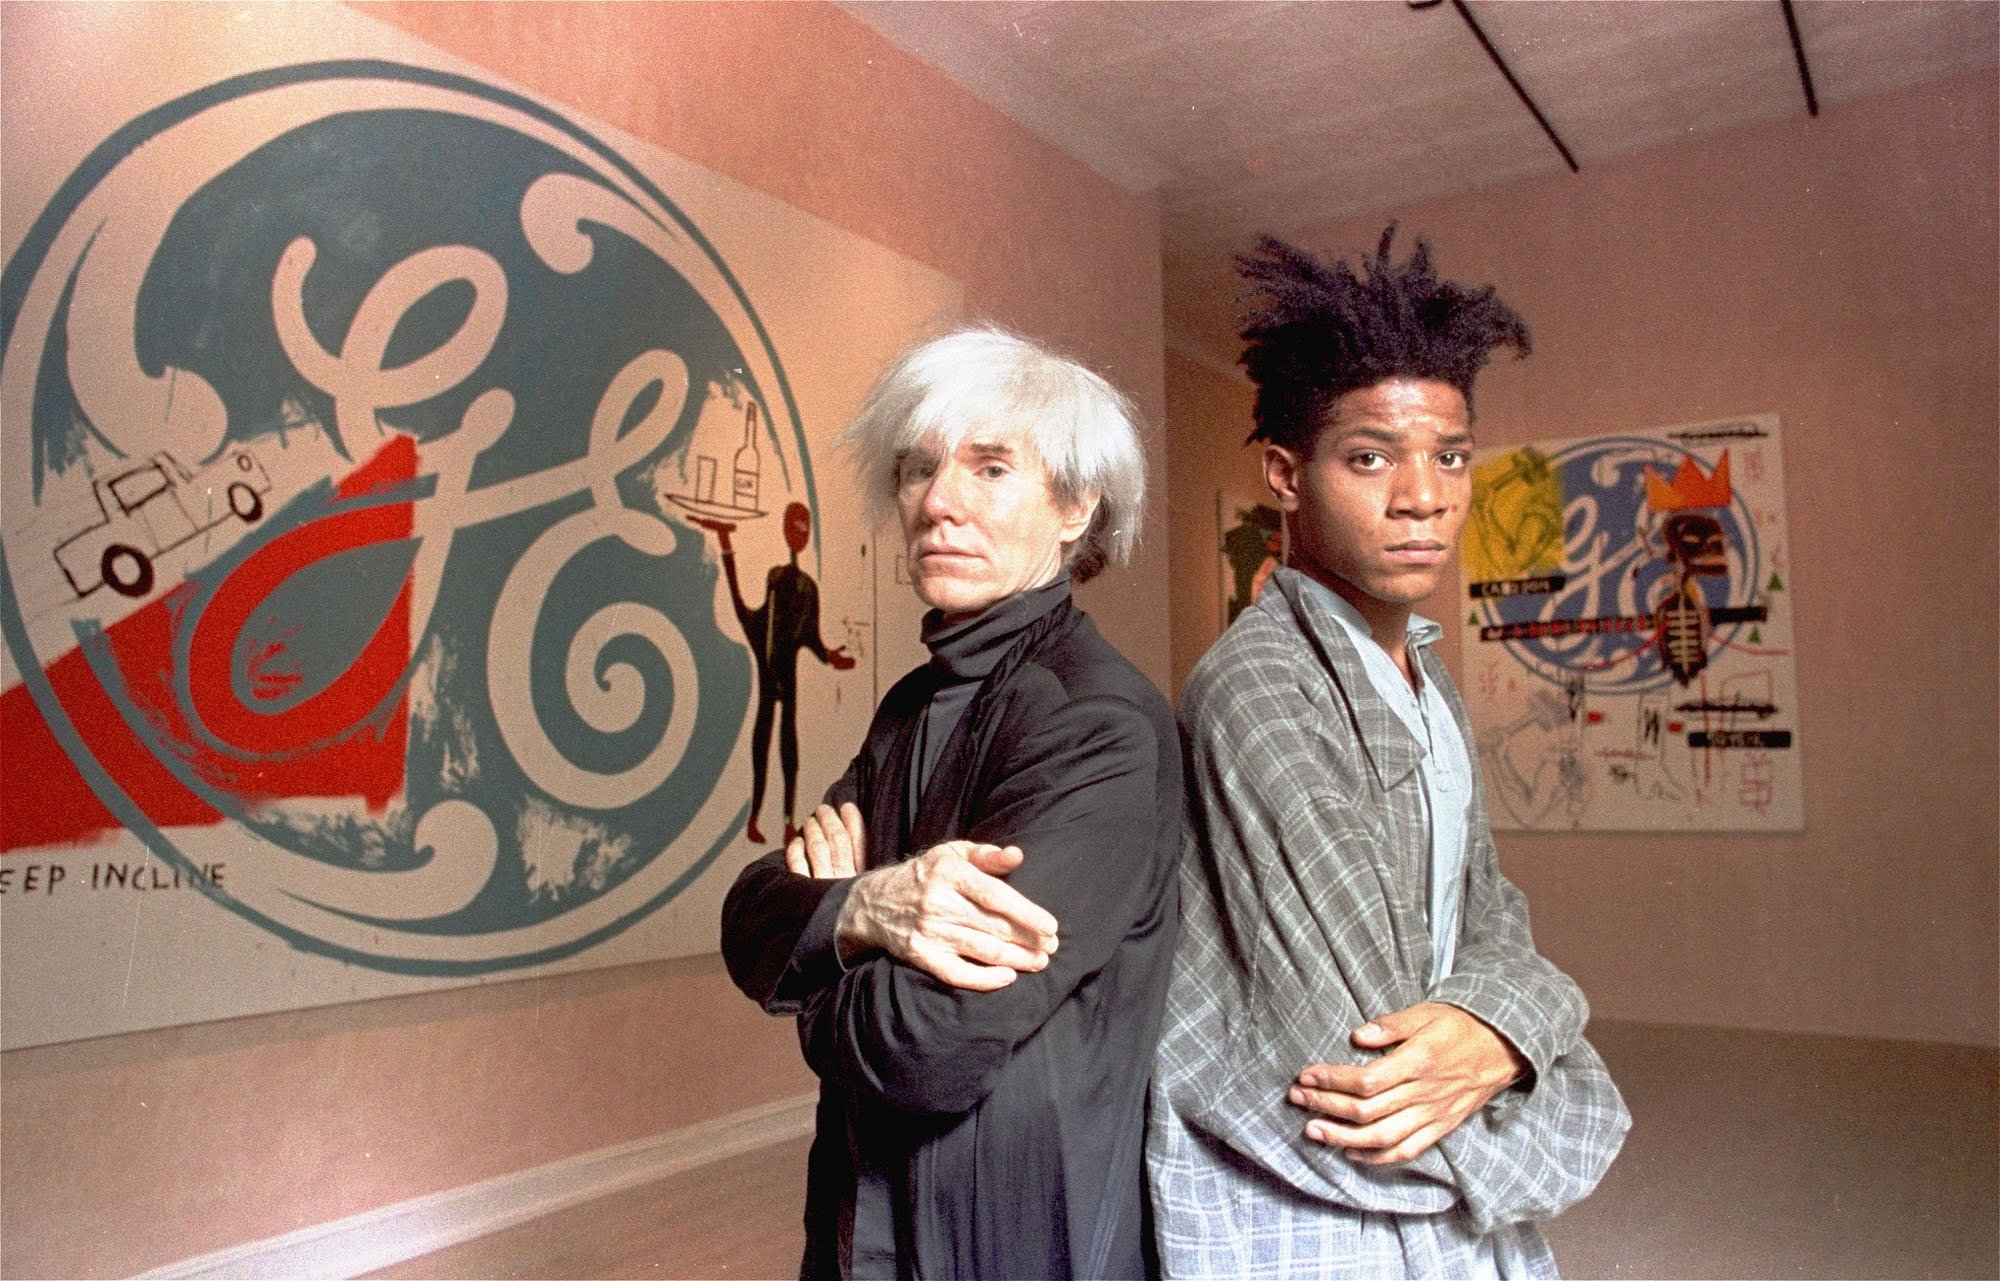 Warhol and Basquiat produced about 150 works together between 1983 and 1985